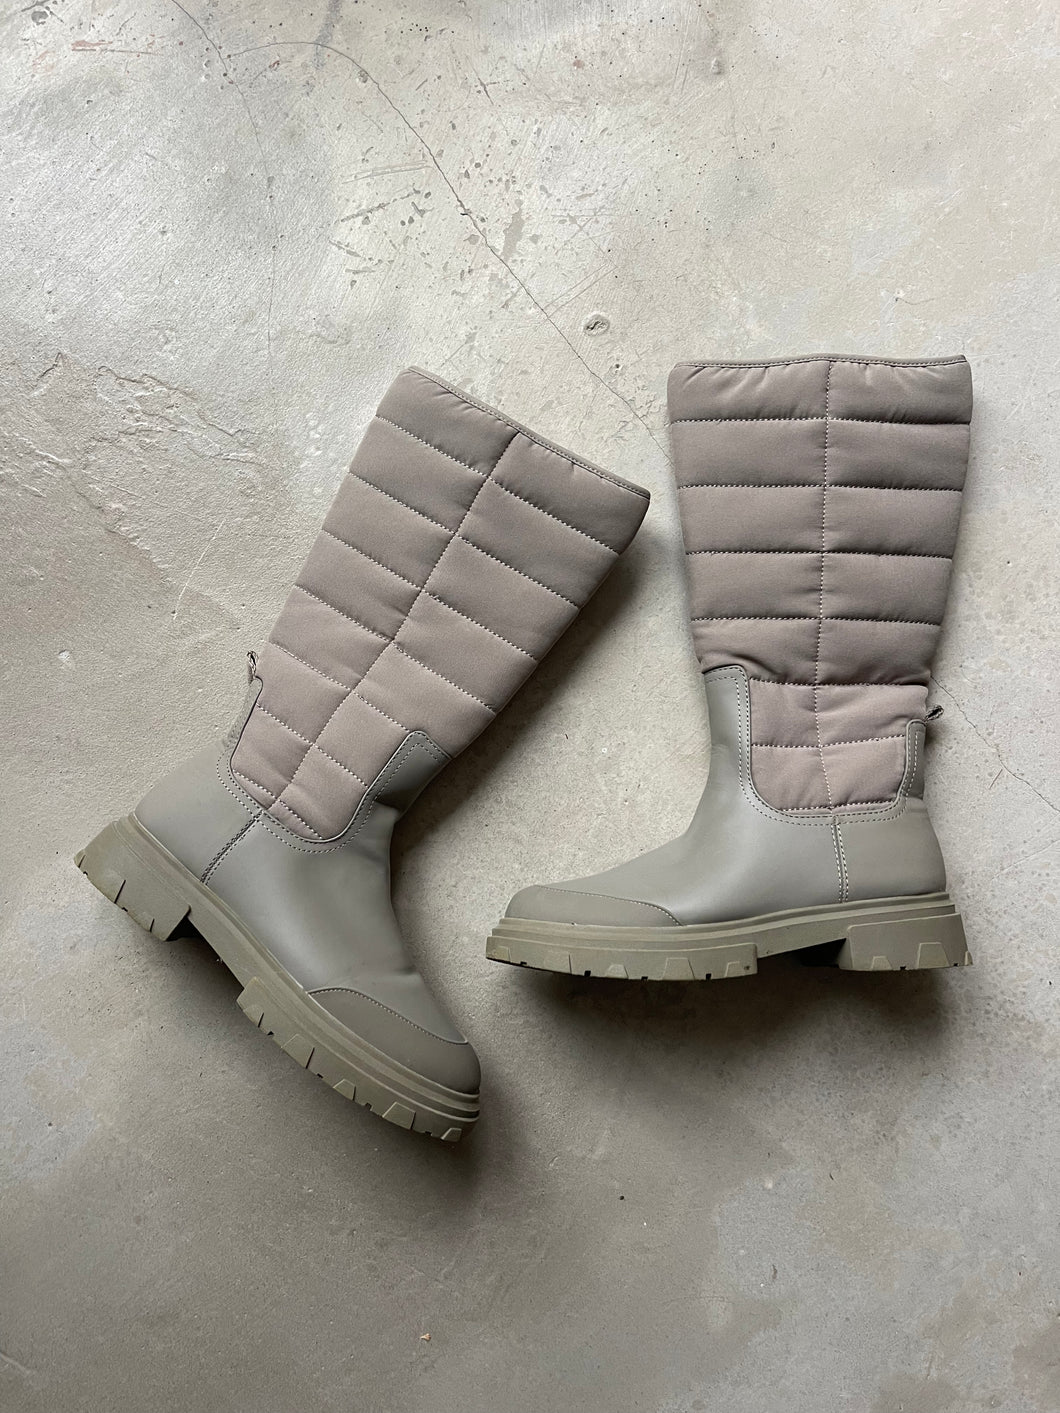 Zara Quilted Boots - UK 6